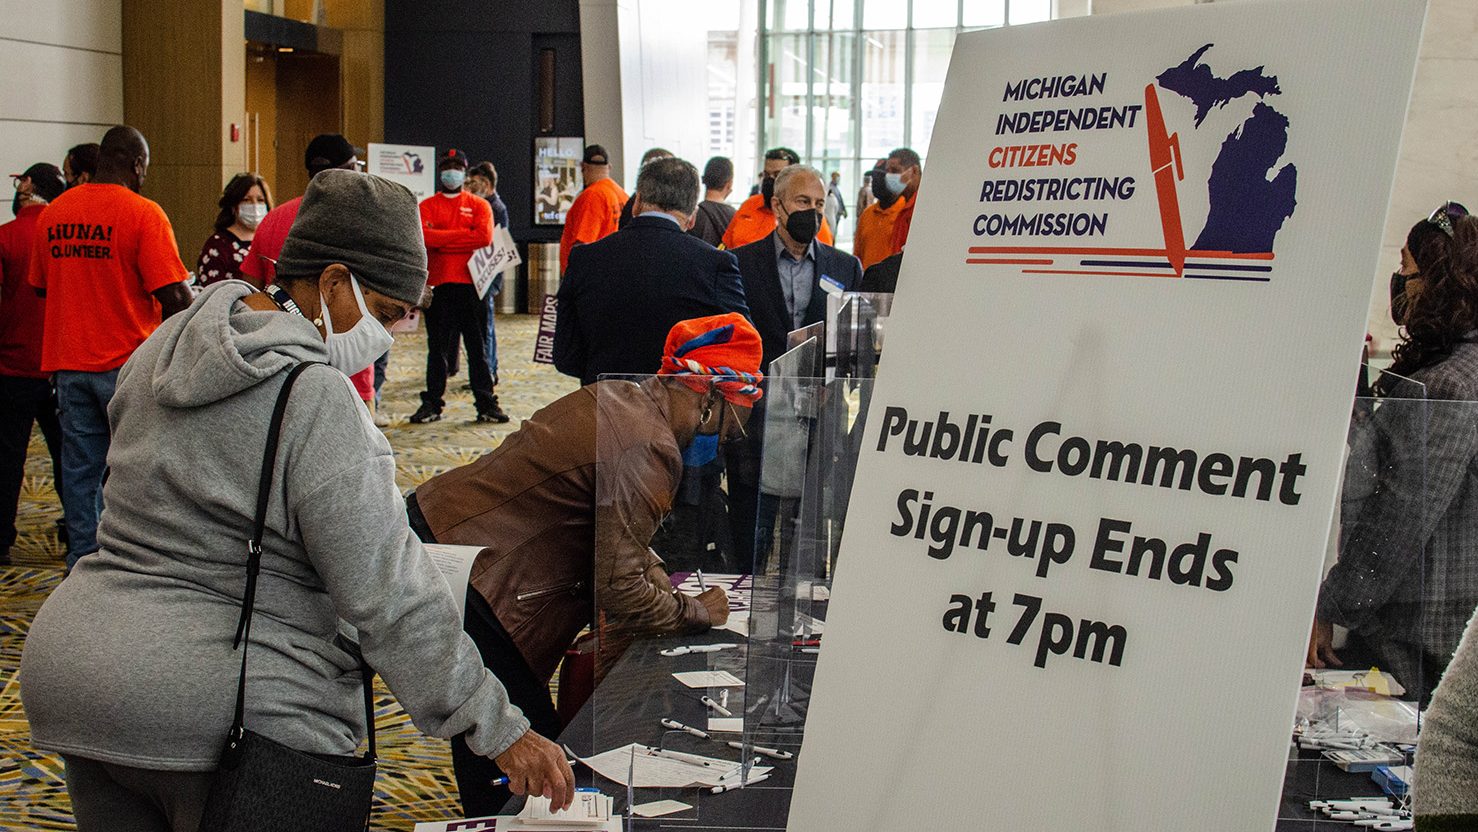 Detroit-area residents sign up for a public comment period at a Michigan Independent Citizens Redistricting Commission meeting at Huntington Place on Oct. 20, 2021.